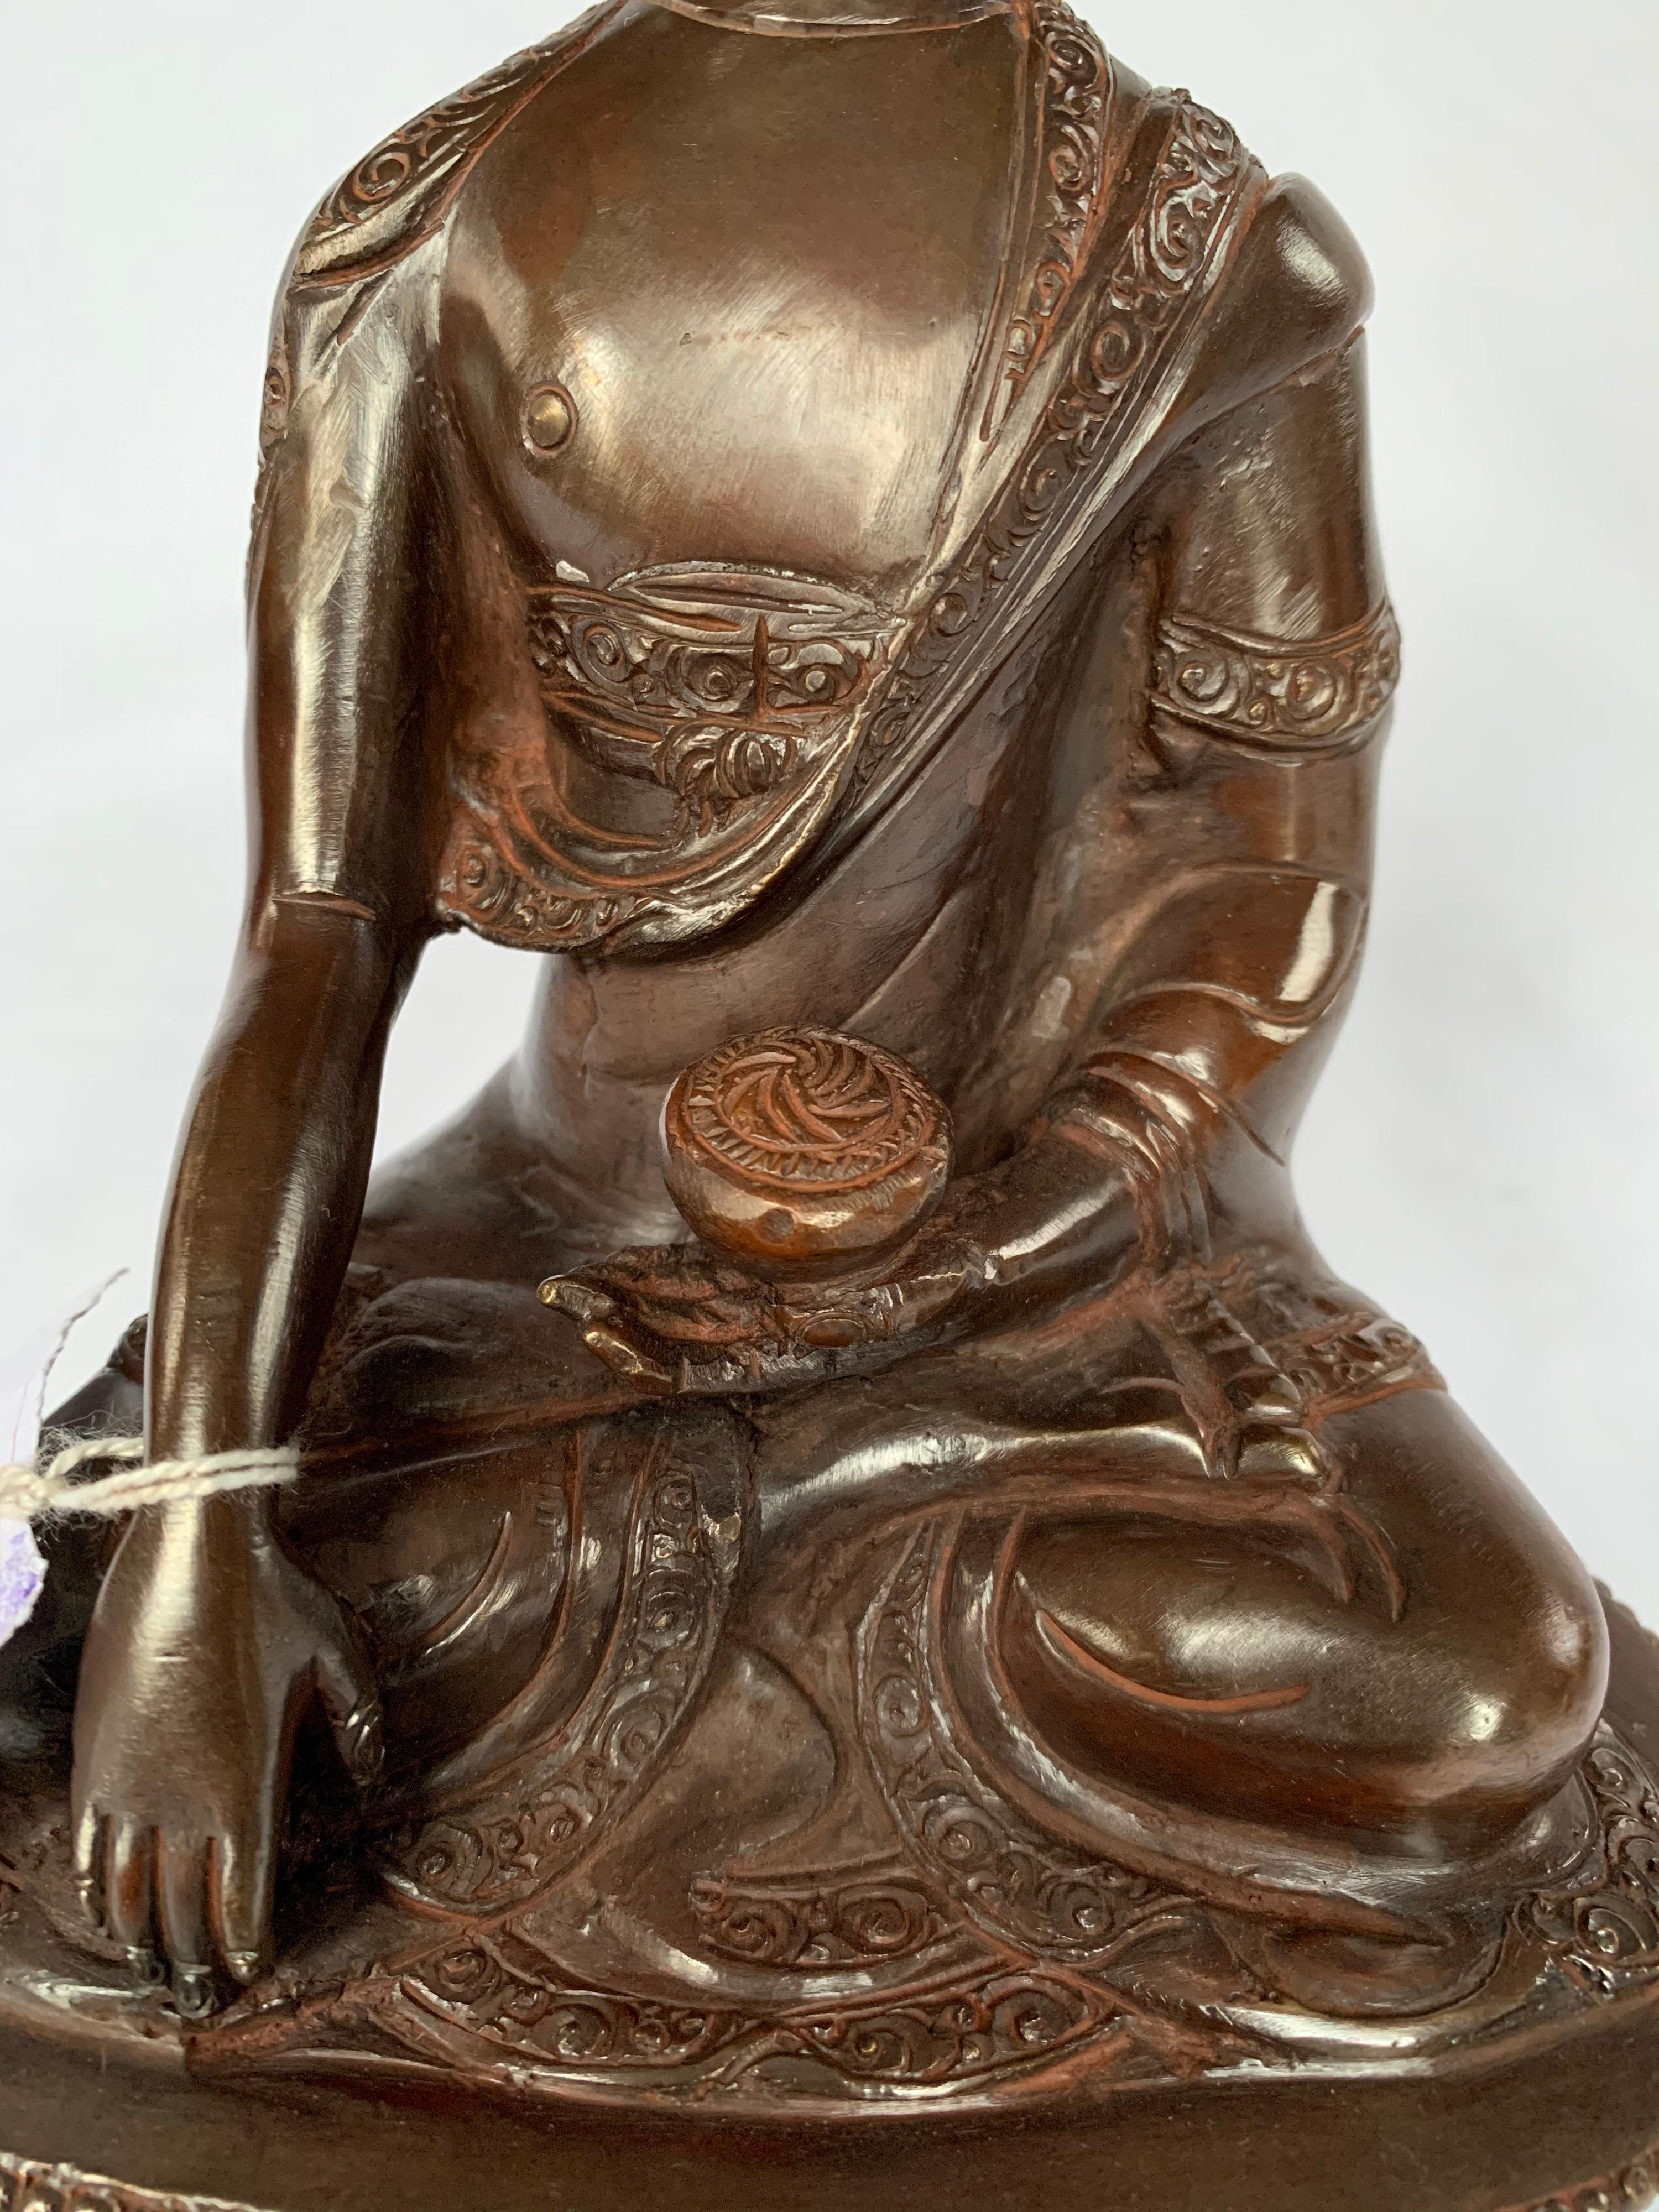 Lost wax process statue is 100% handcrafted techniques of creating a statues or figurine. The process is unique and only one of a kind out come will be obtained. 

The particular statues is Shakyamuni Buddha is full copper and height is 7.8